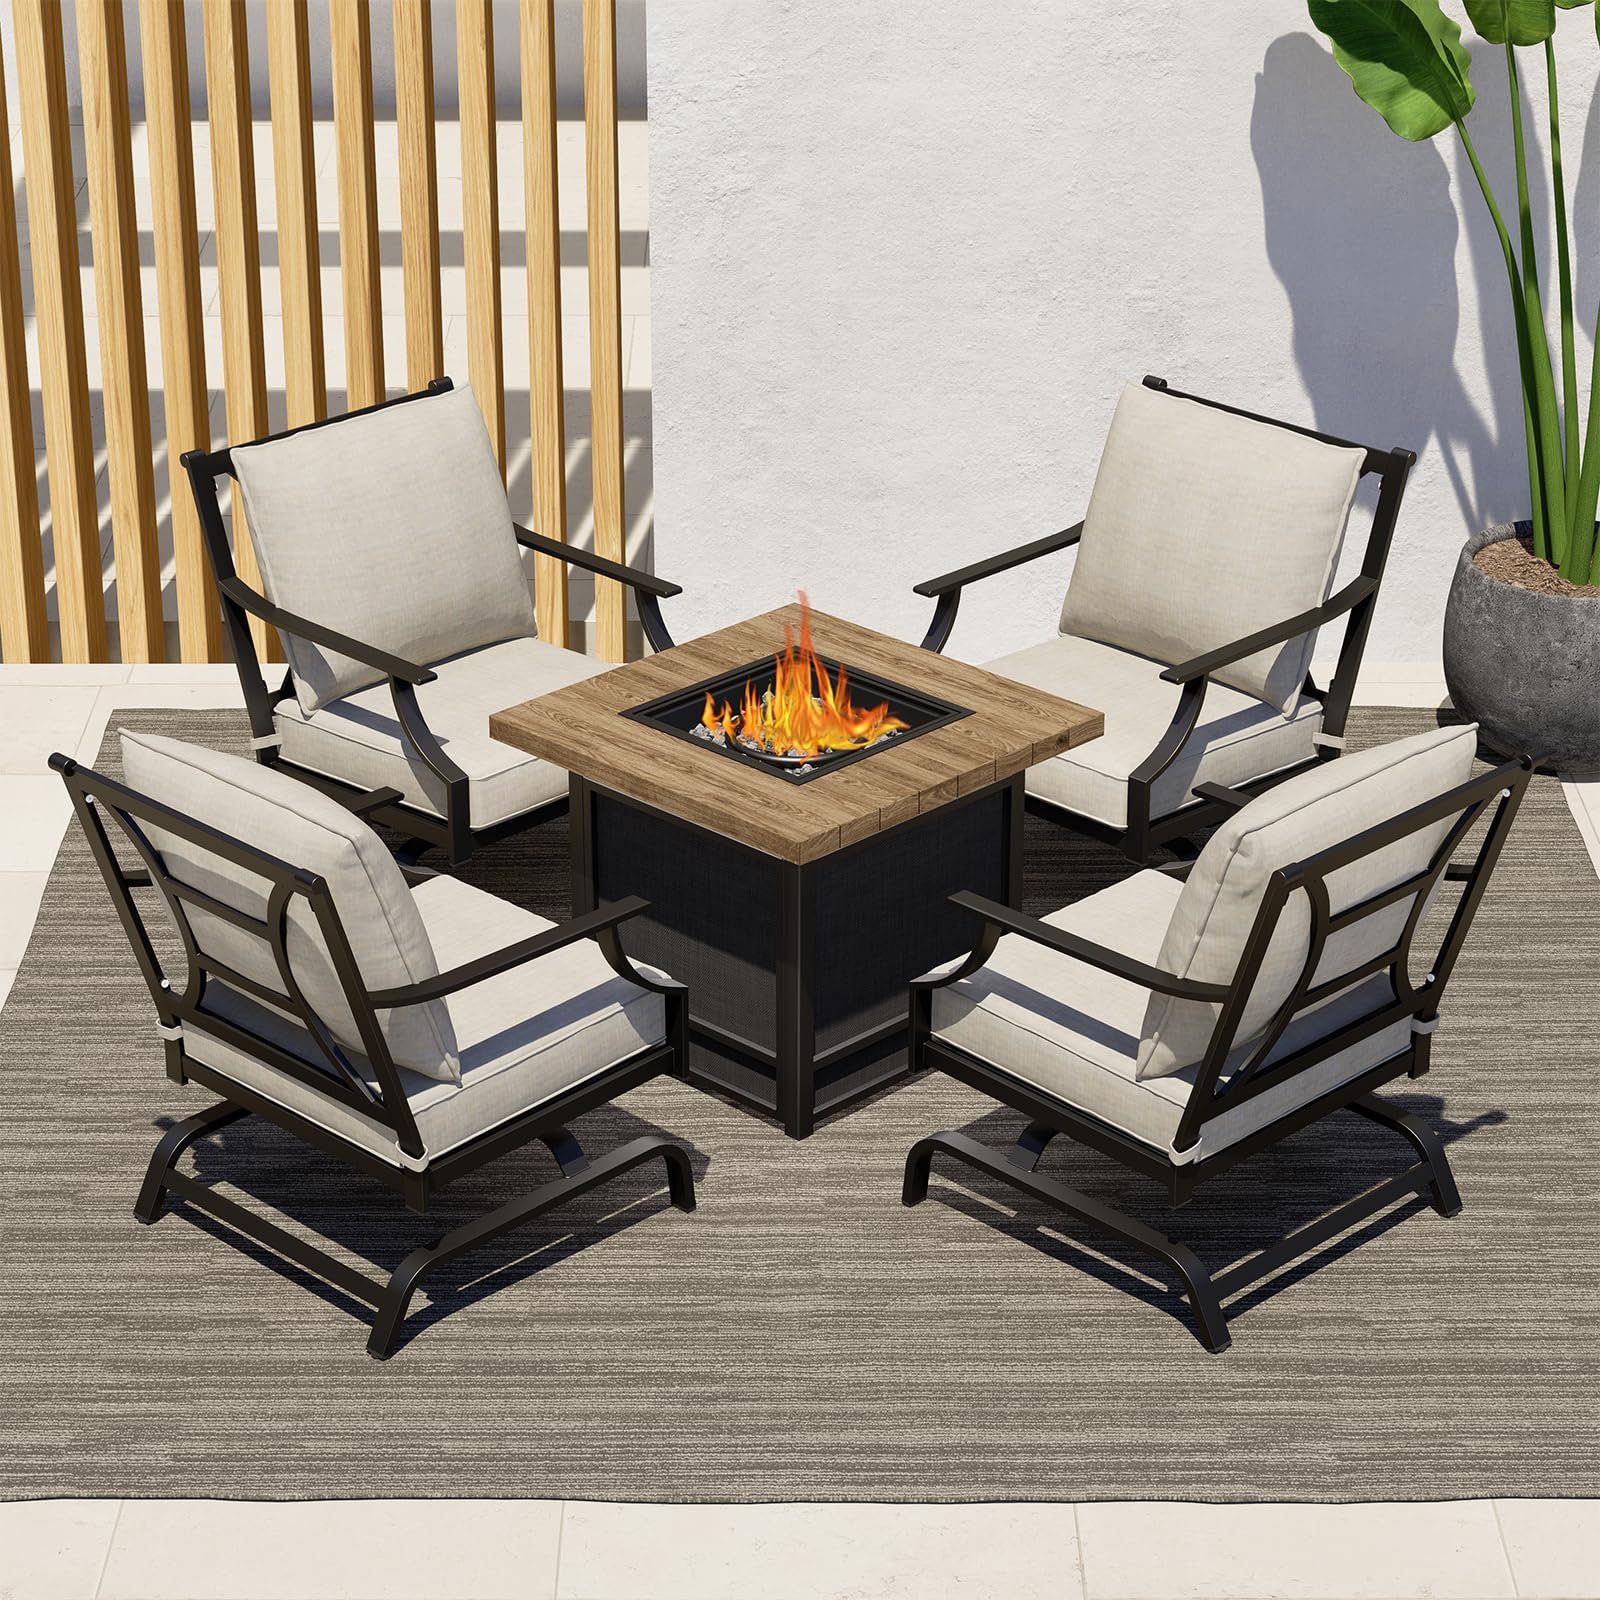 5-Piece Patio Furniture Set with 29-Inch CSA Approved Woodgrain Propane Gas Fire Pit Table Coated Steel Outdoor Rocking Chairs with Gray Olefin Cushions